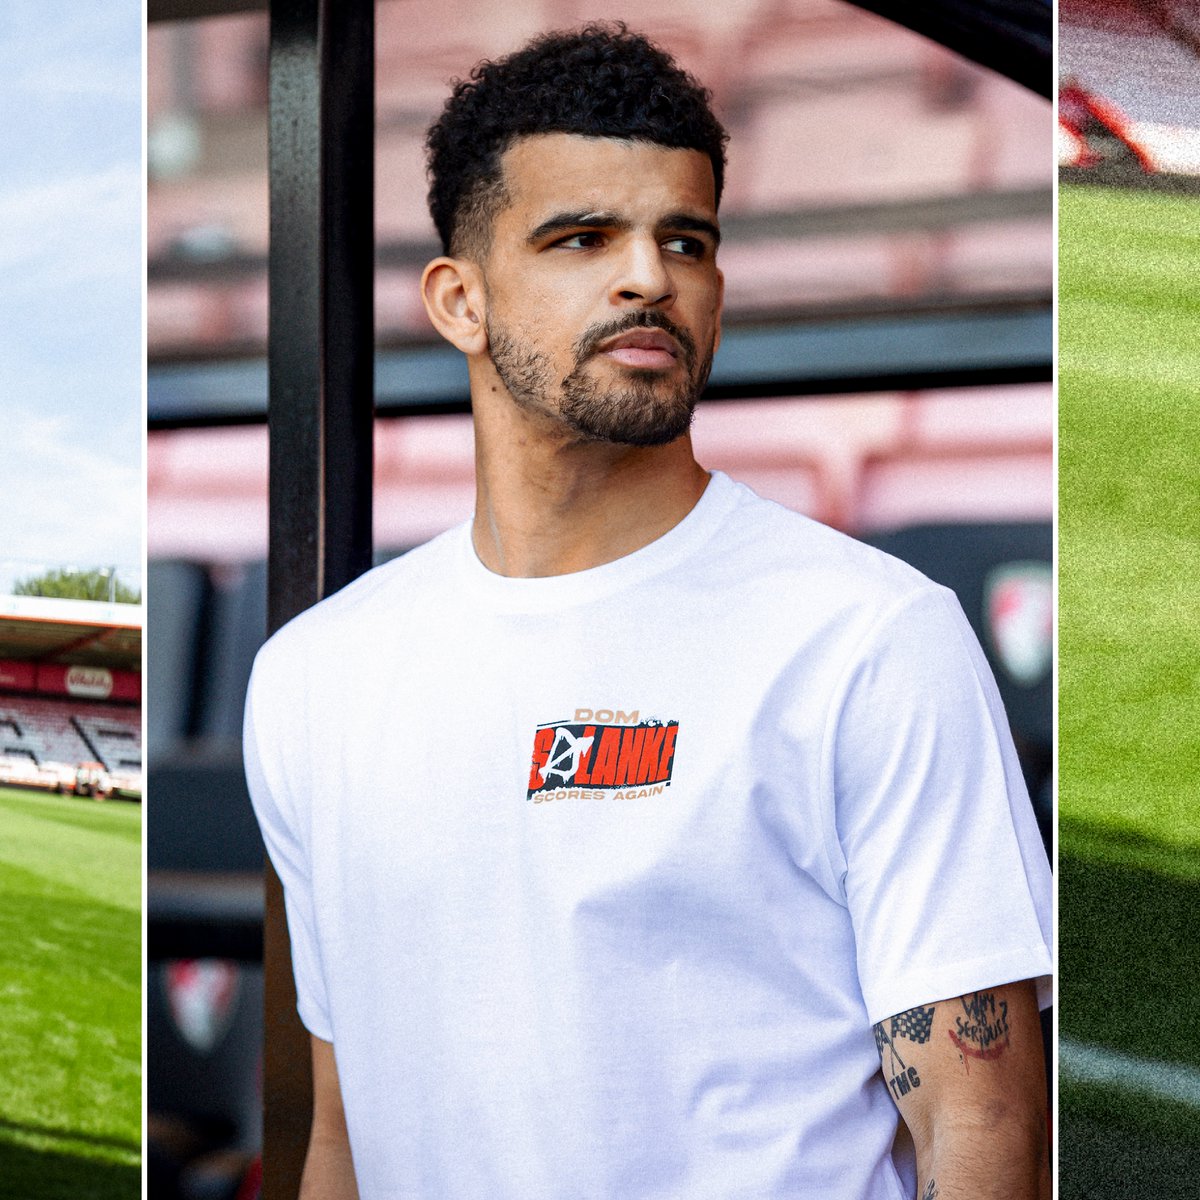 🚨 LIMITED DROP 🚨 Our limited edition @DomSolanke tee drops tomorrow morning at 9am, online and in-store 🔥 Who's copping? 🏹